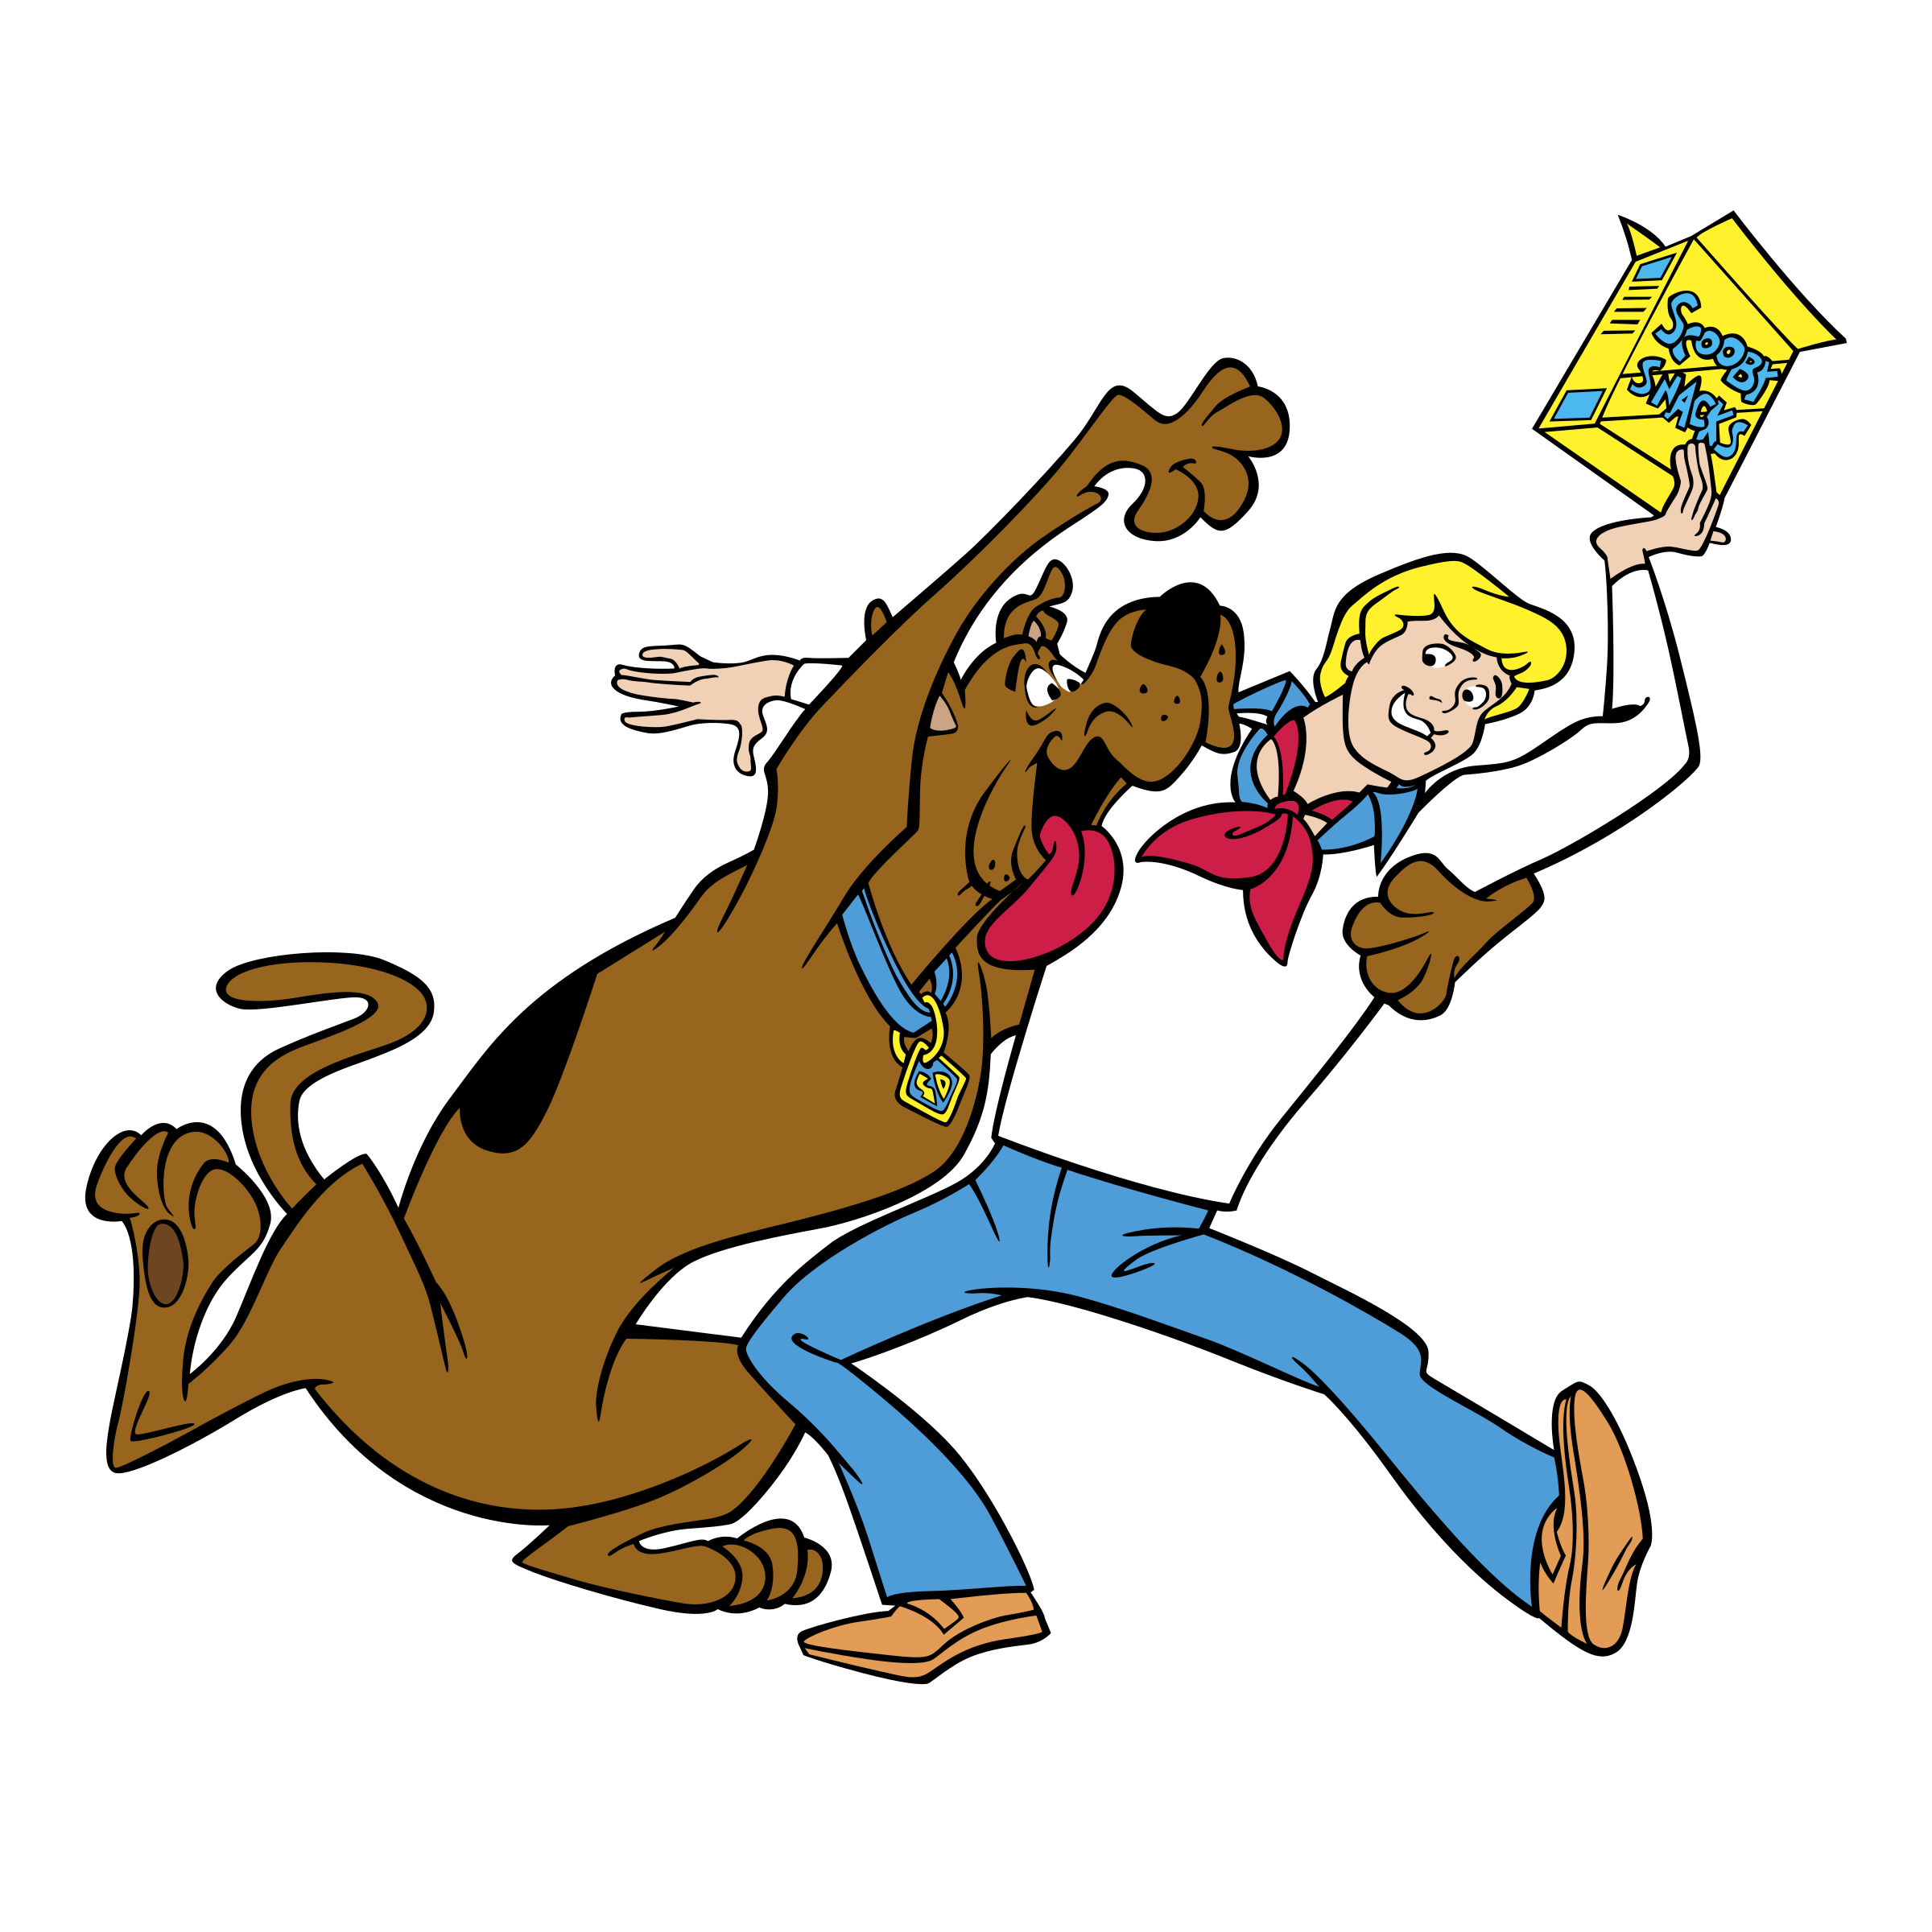 Scooby doo clipart happy, Scooby doo happy Transparent FREE for ...